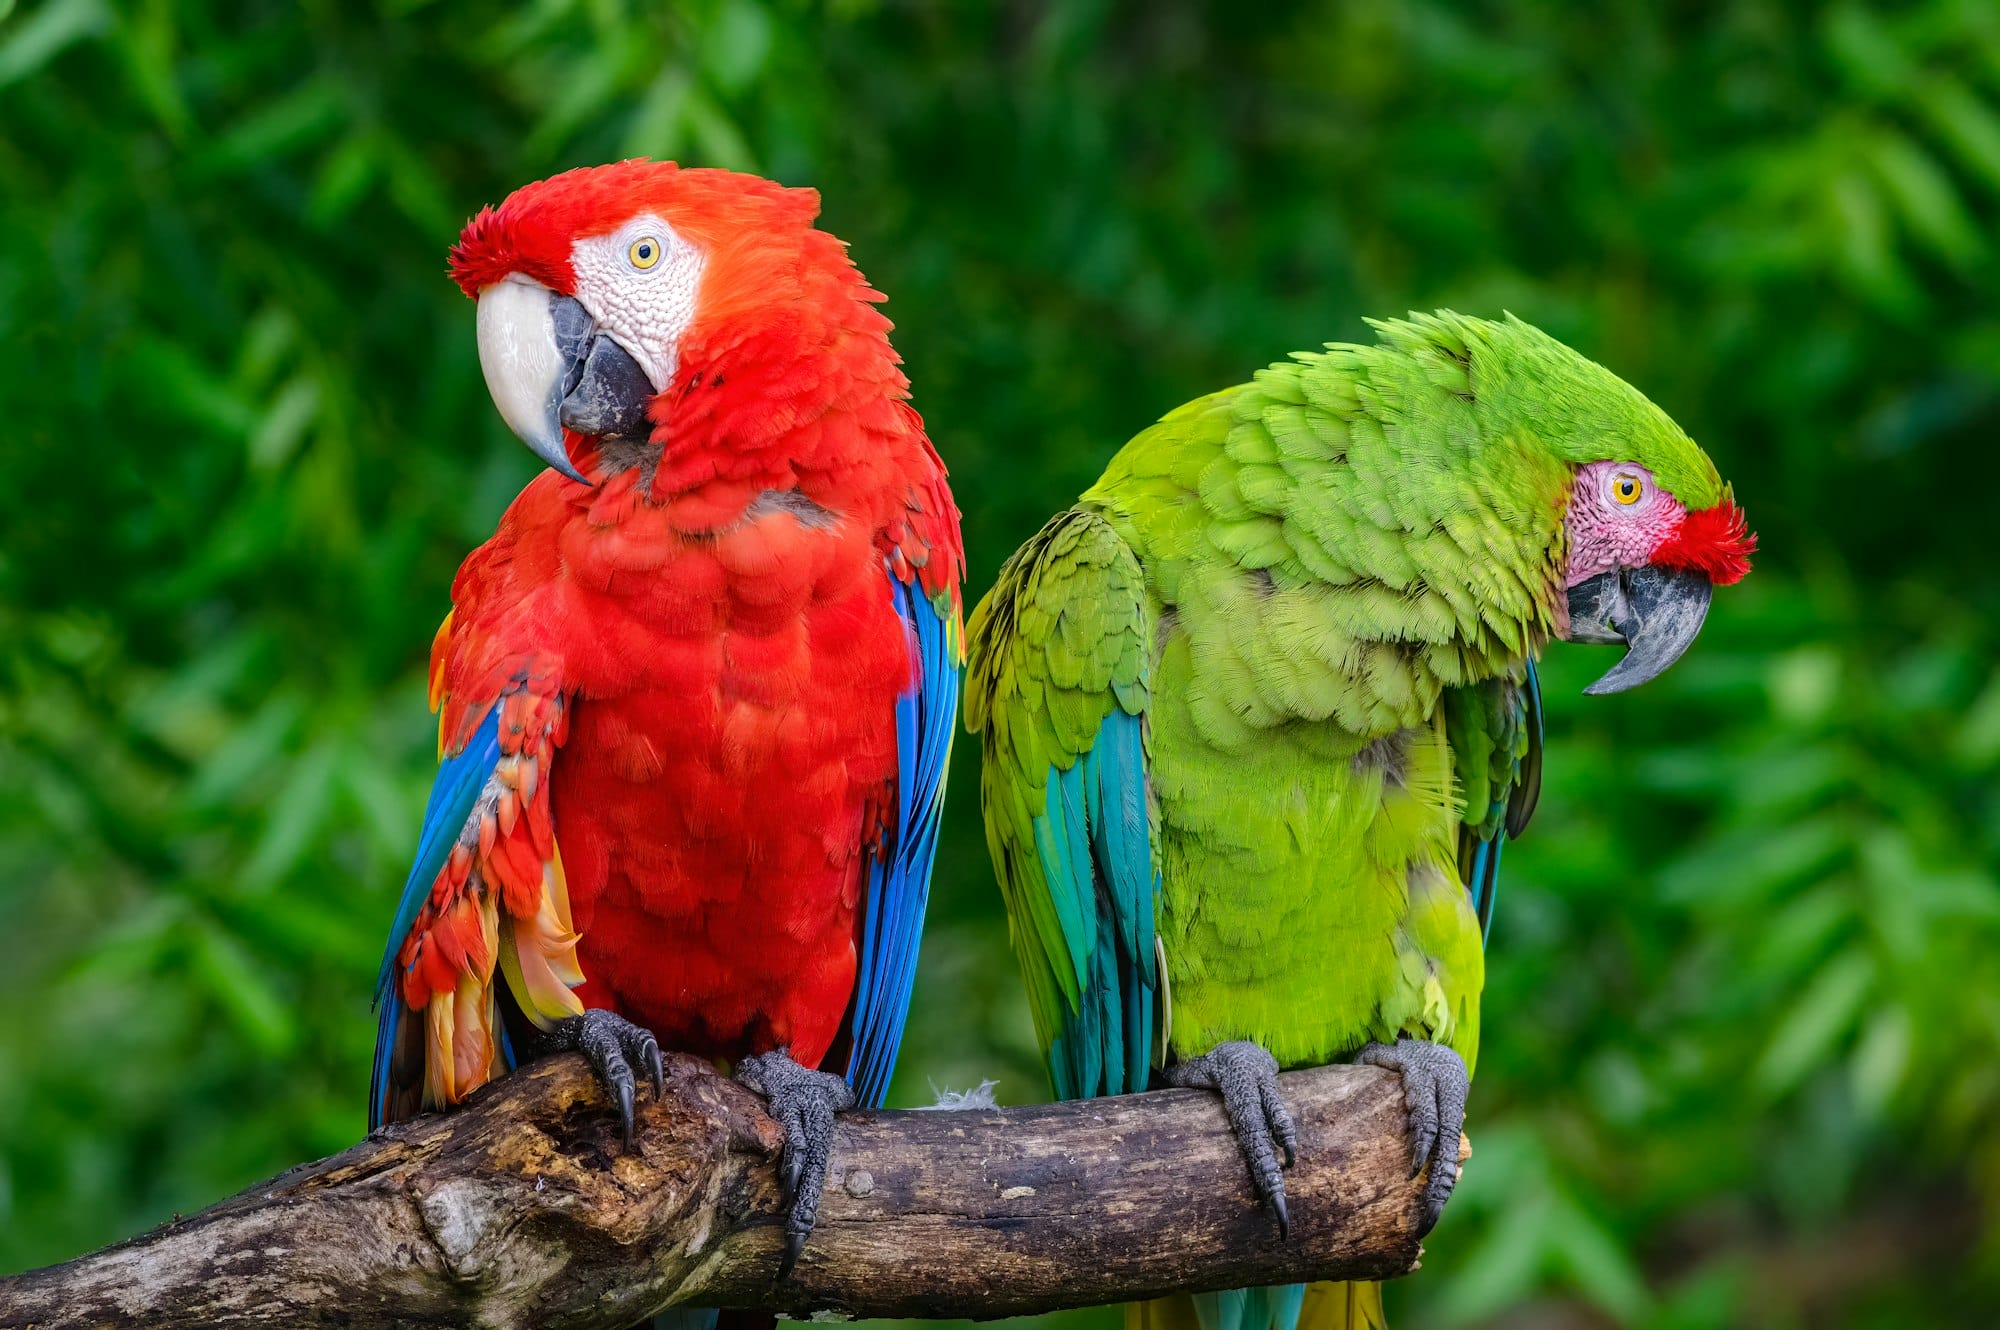 Scarlet and Military Macaws (Ara militaris and Ara Macao). A pair of macaws perched on a dry branch